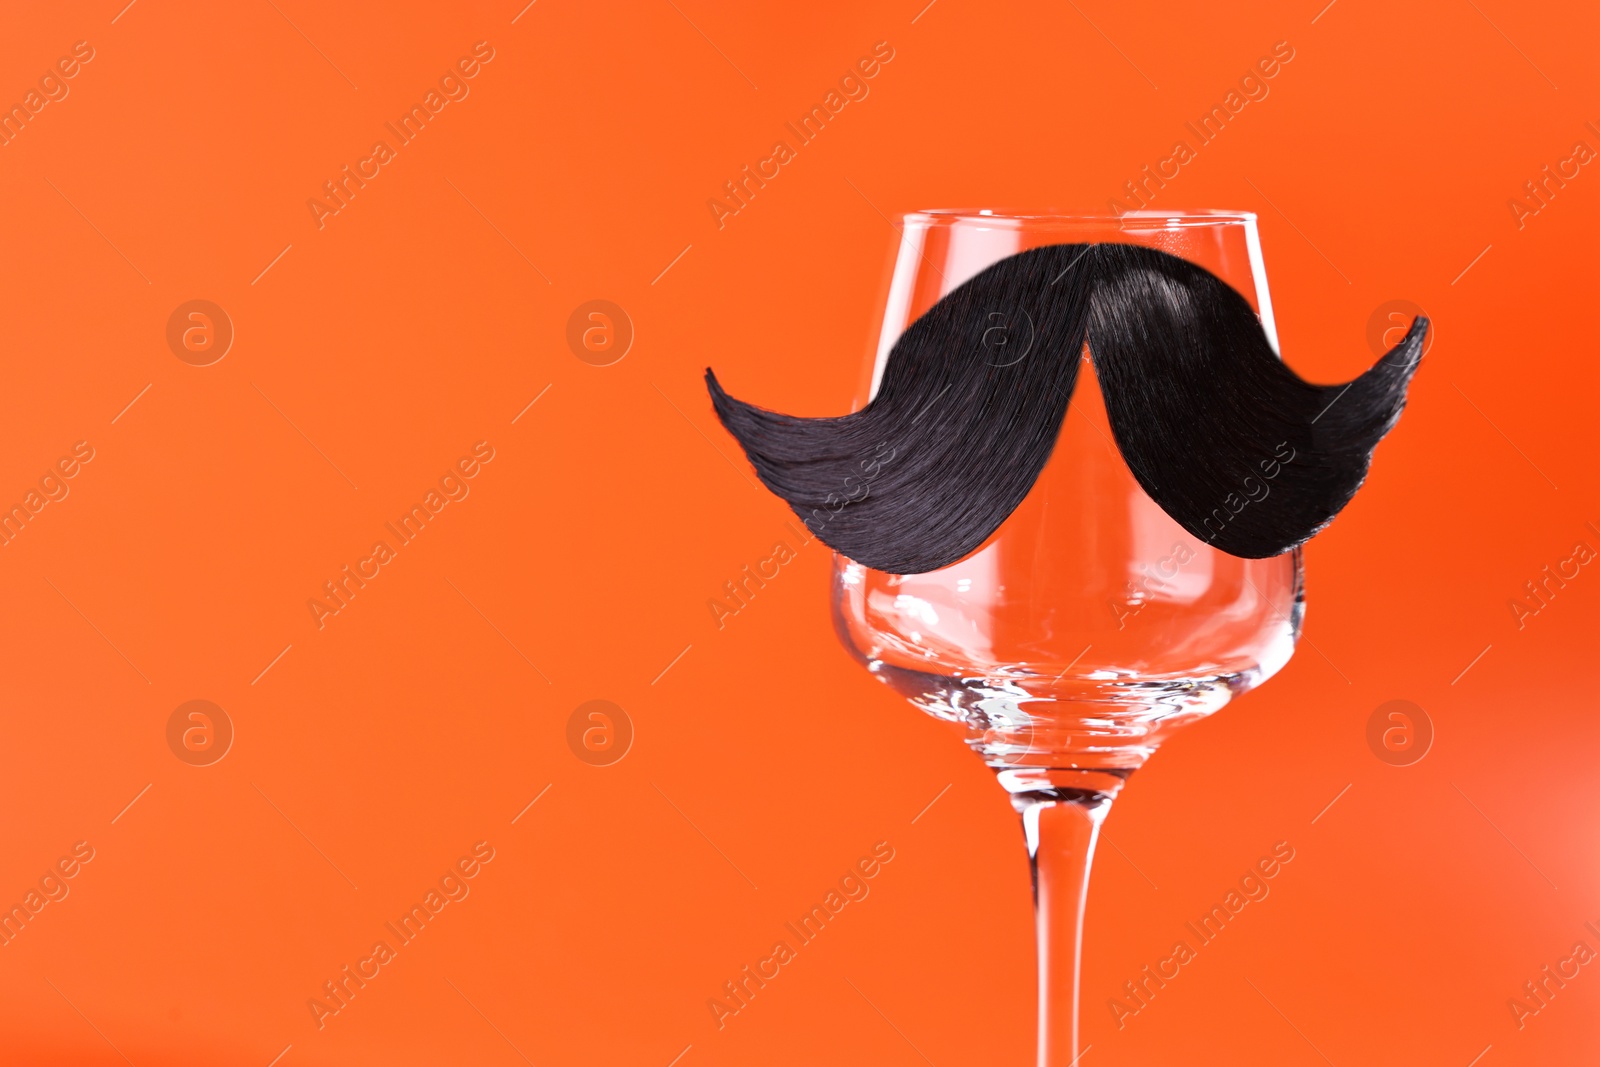 Photo of Man's face made of artificial mustache and wine glass on orange background. Space for text